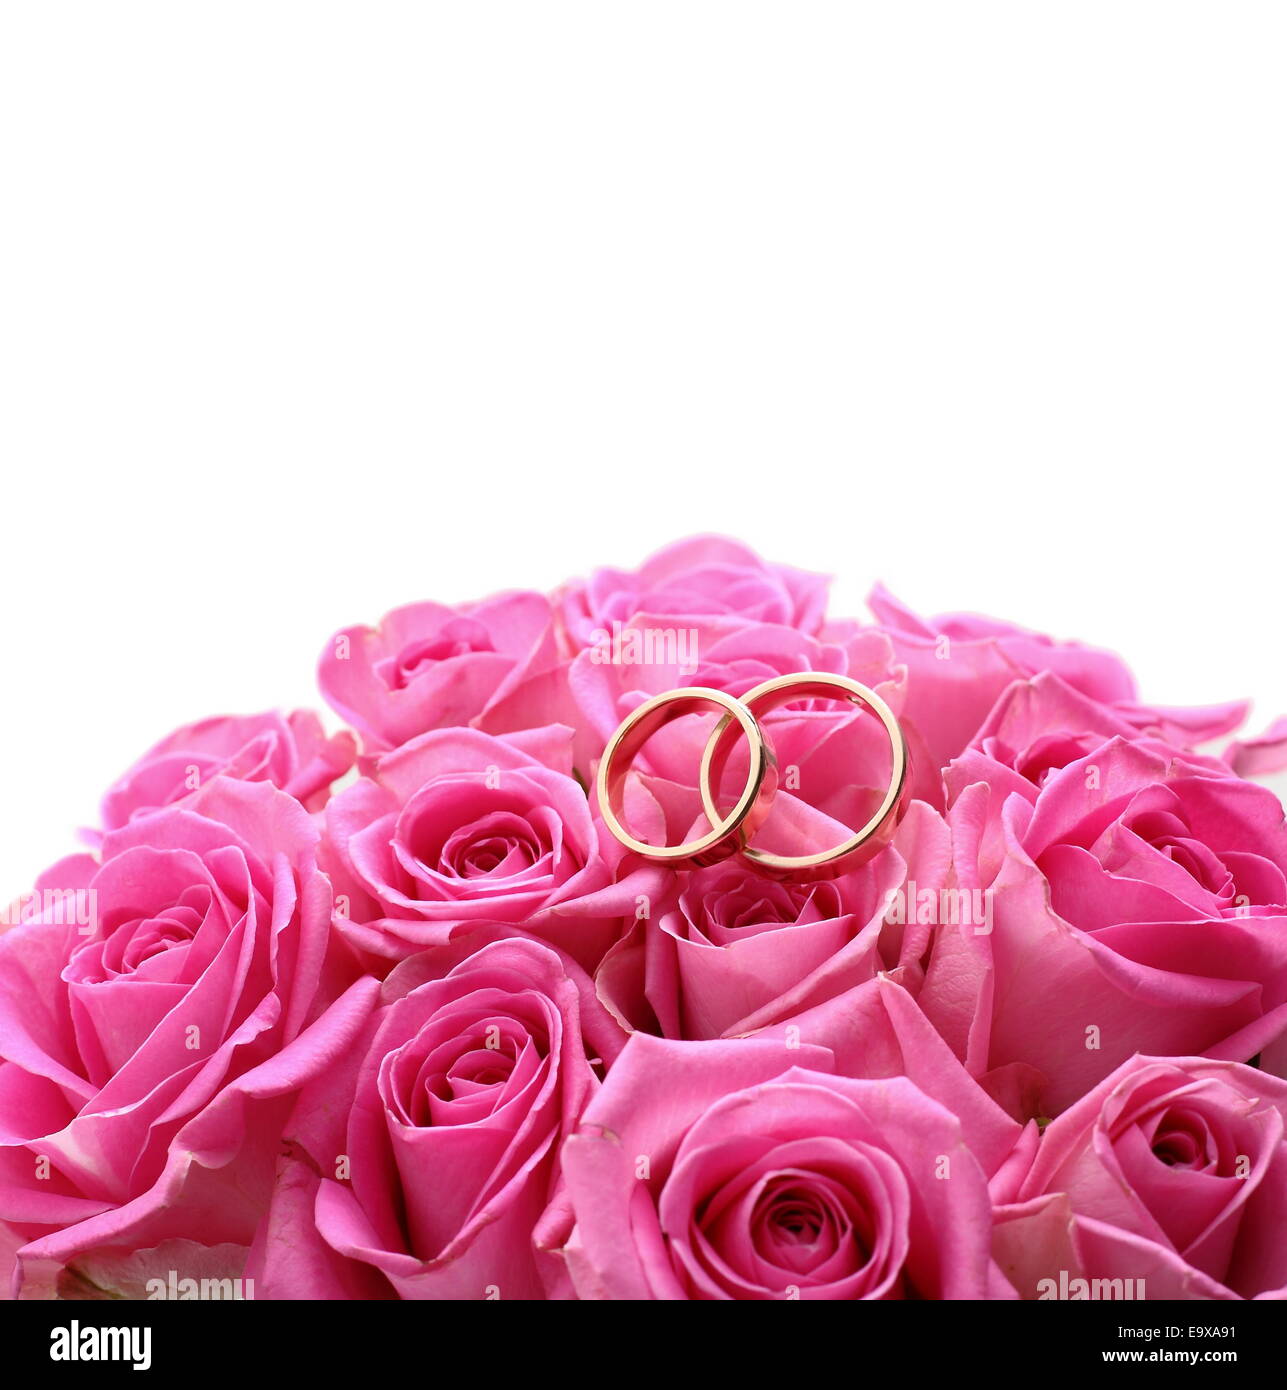 Set of wedding rings in pink rose taken close up, isolated Stock Photo